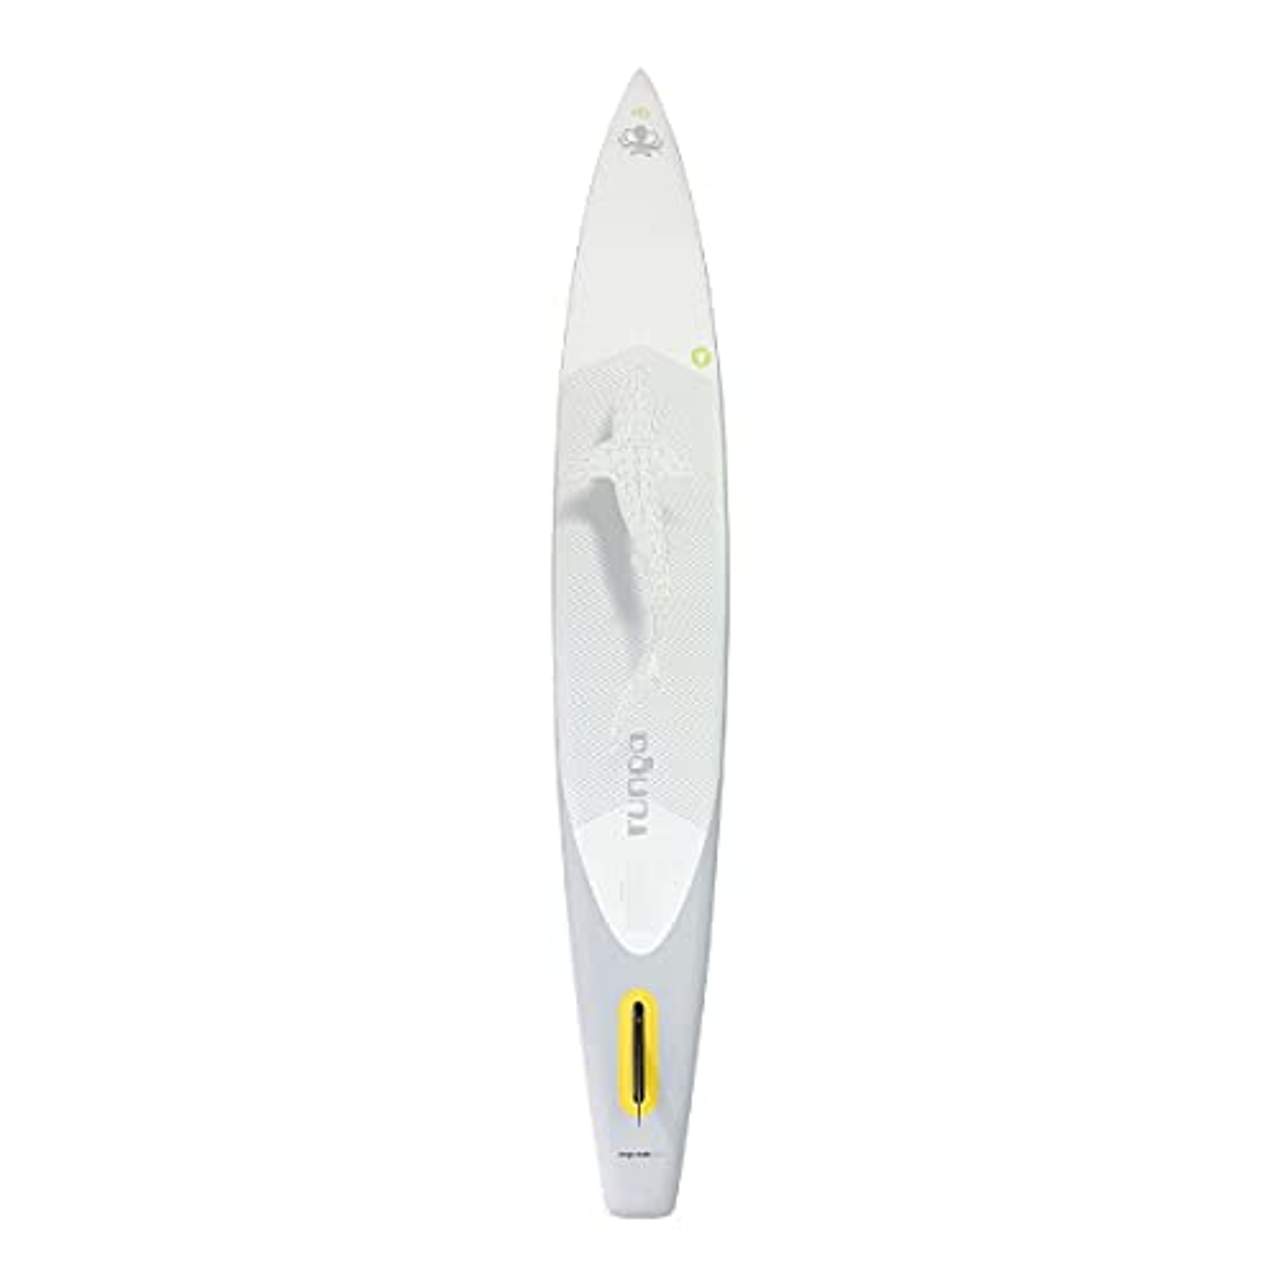 RUNGA Mako Race AIR 14.0 Inflatable SUP iSUP Stand UP Paddle Board #RB65